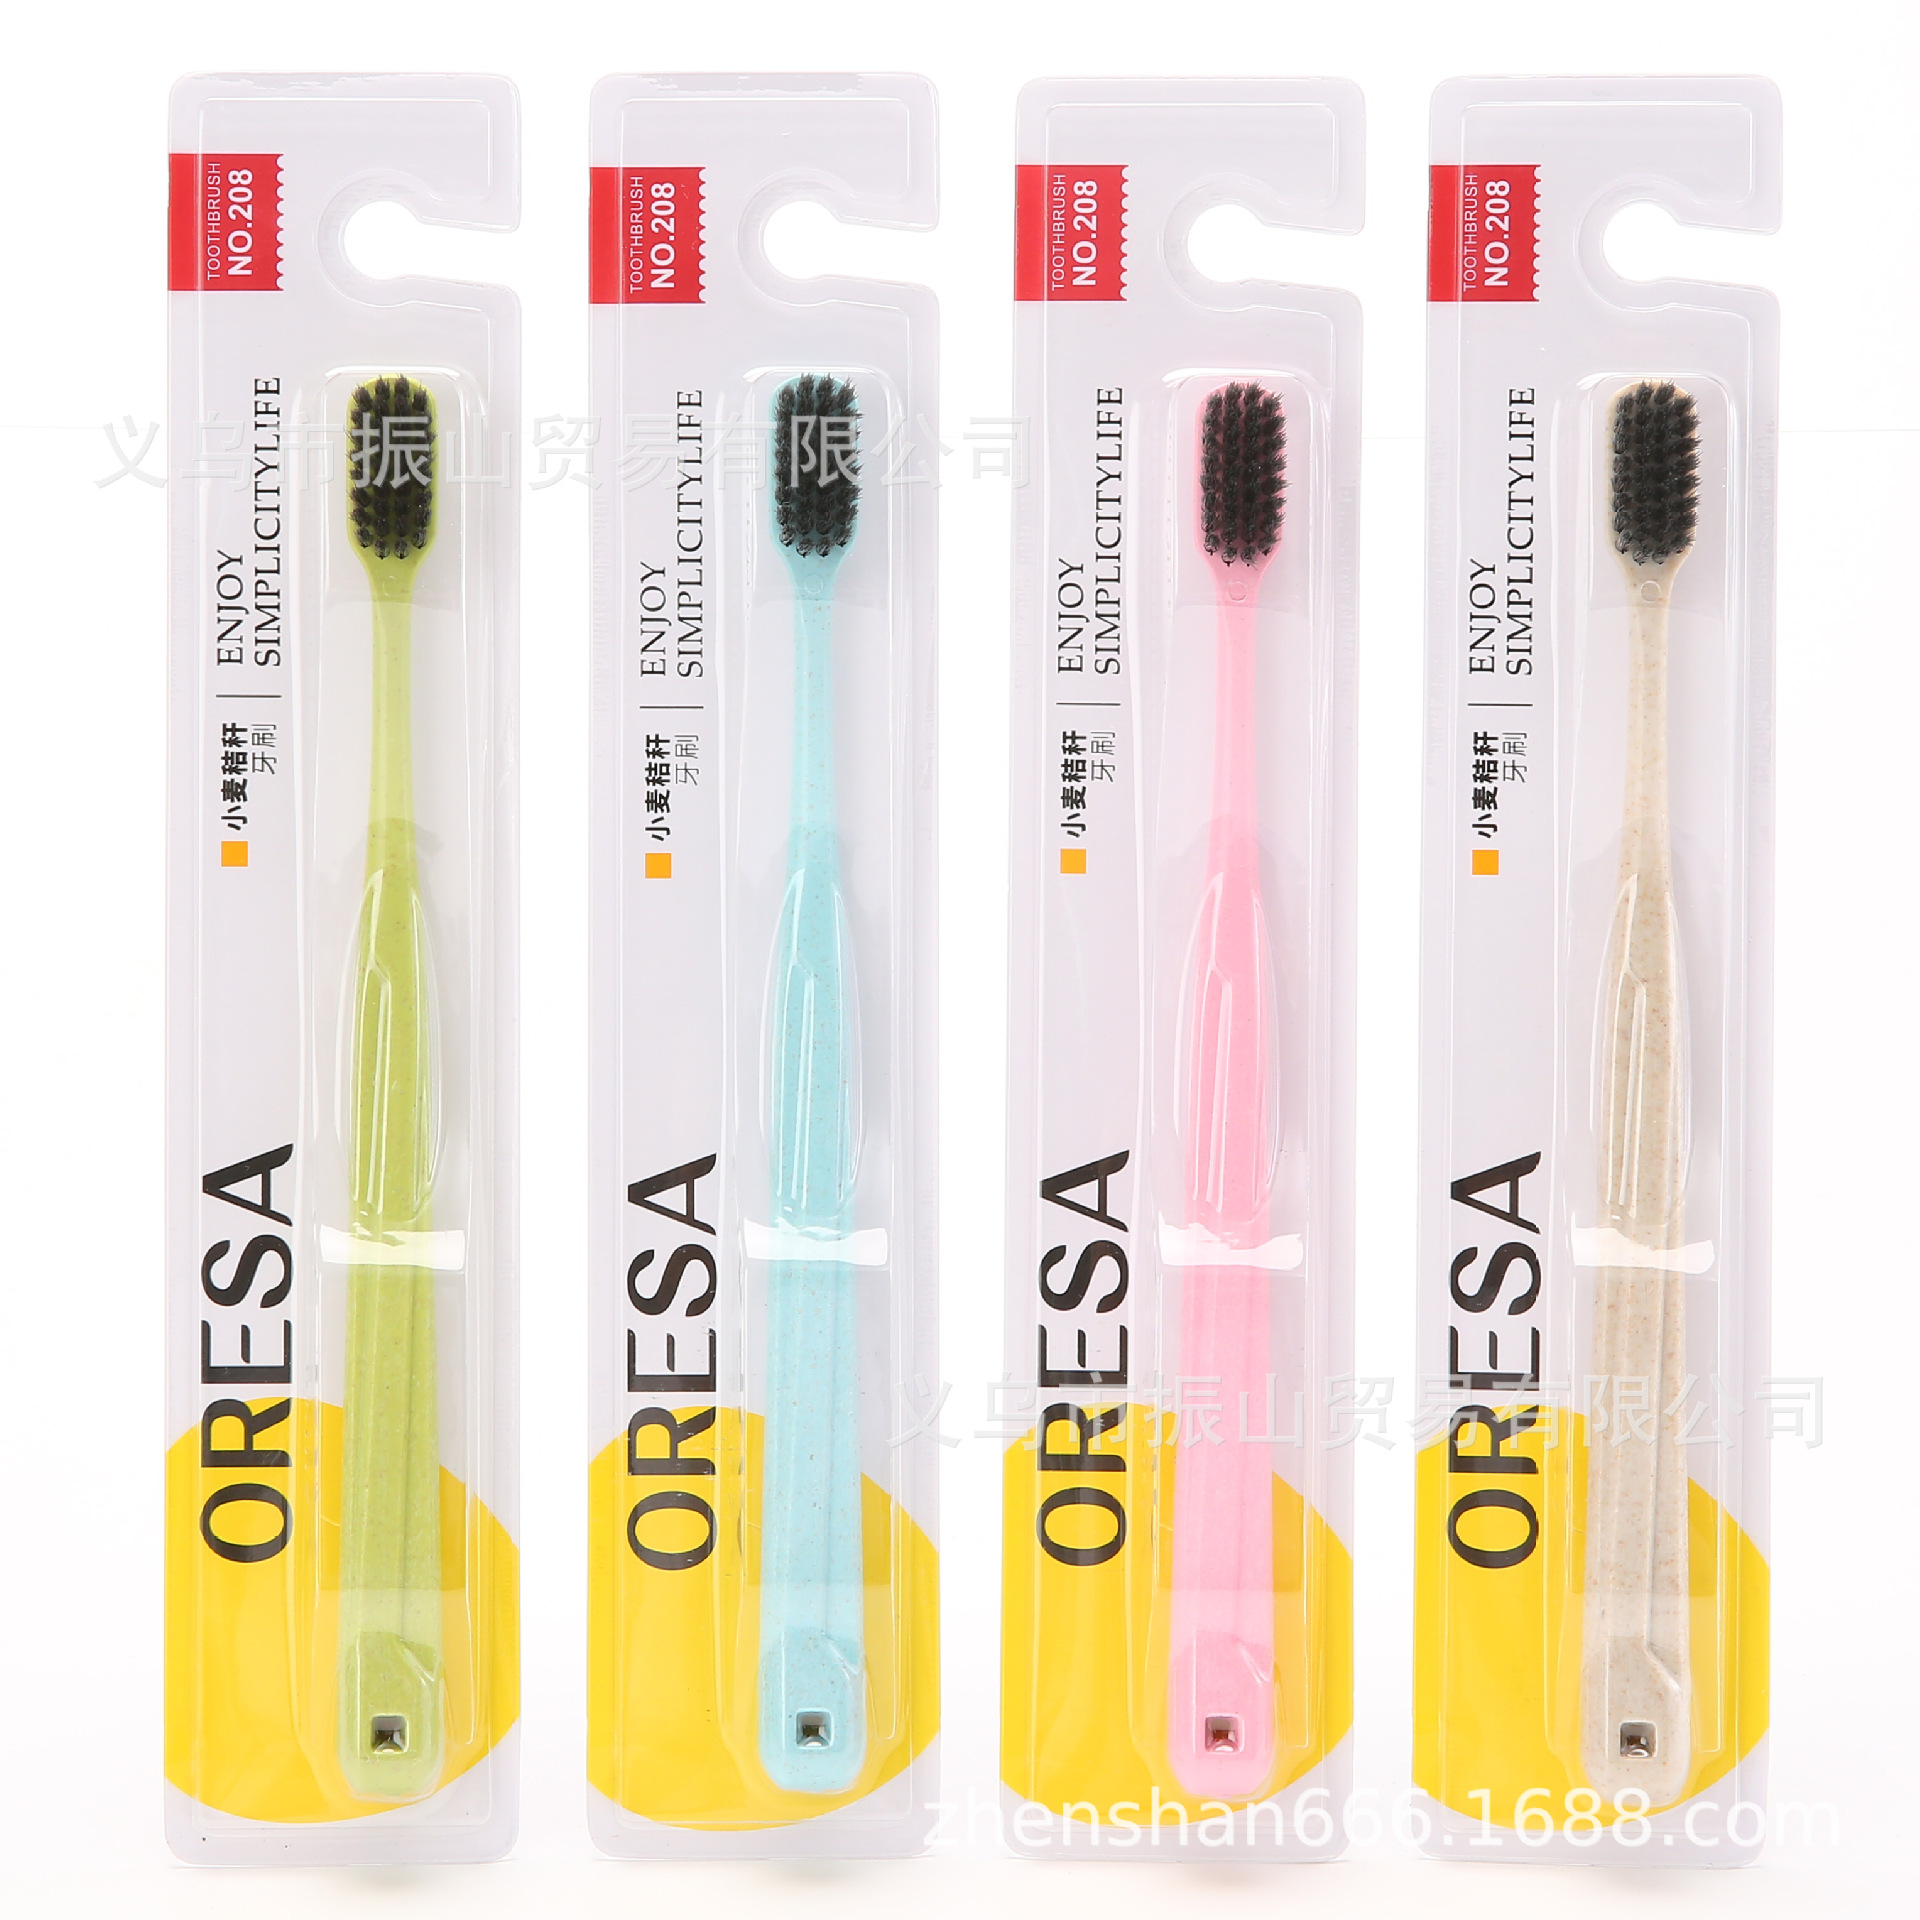 Olaishuang 208 Smile Fresh Bloom Wheat Straw Bamboo Charcoal Soft-Bristle Toothbrush